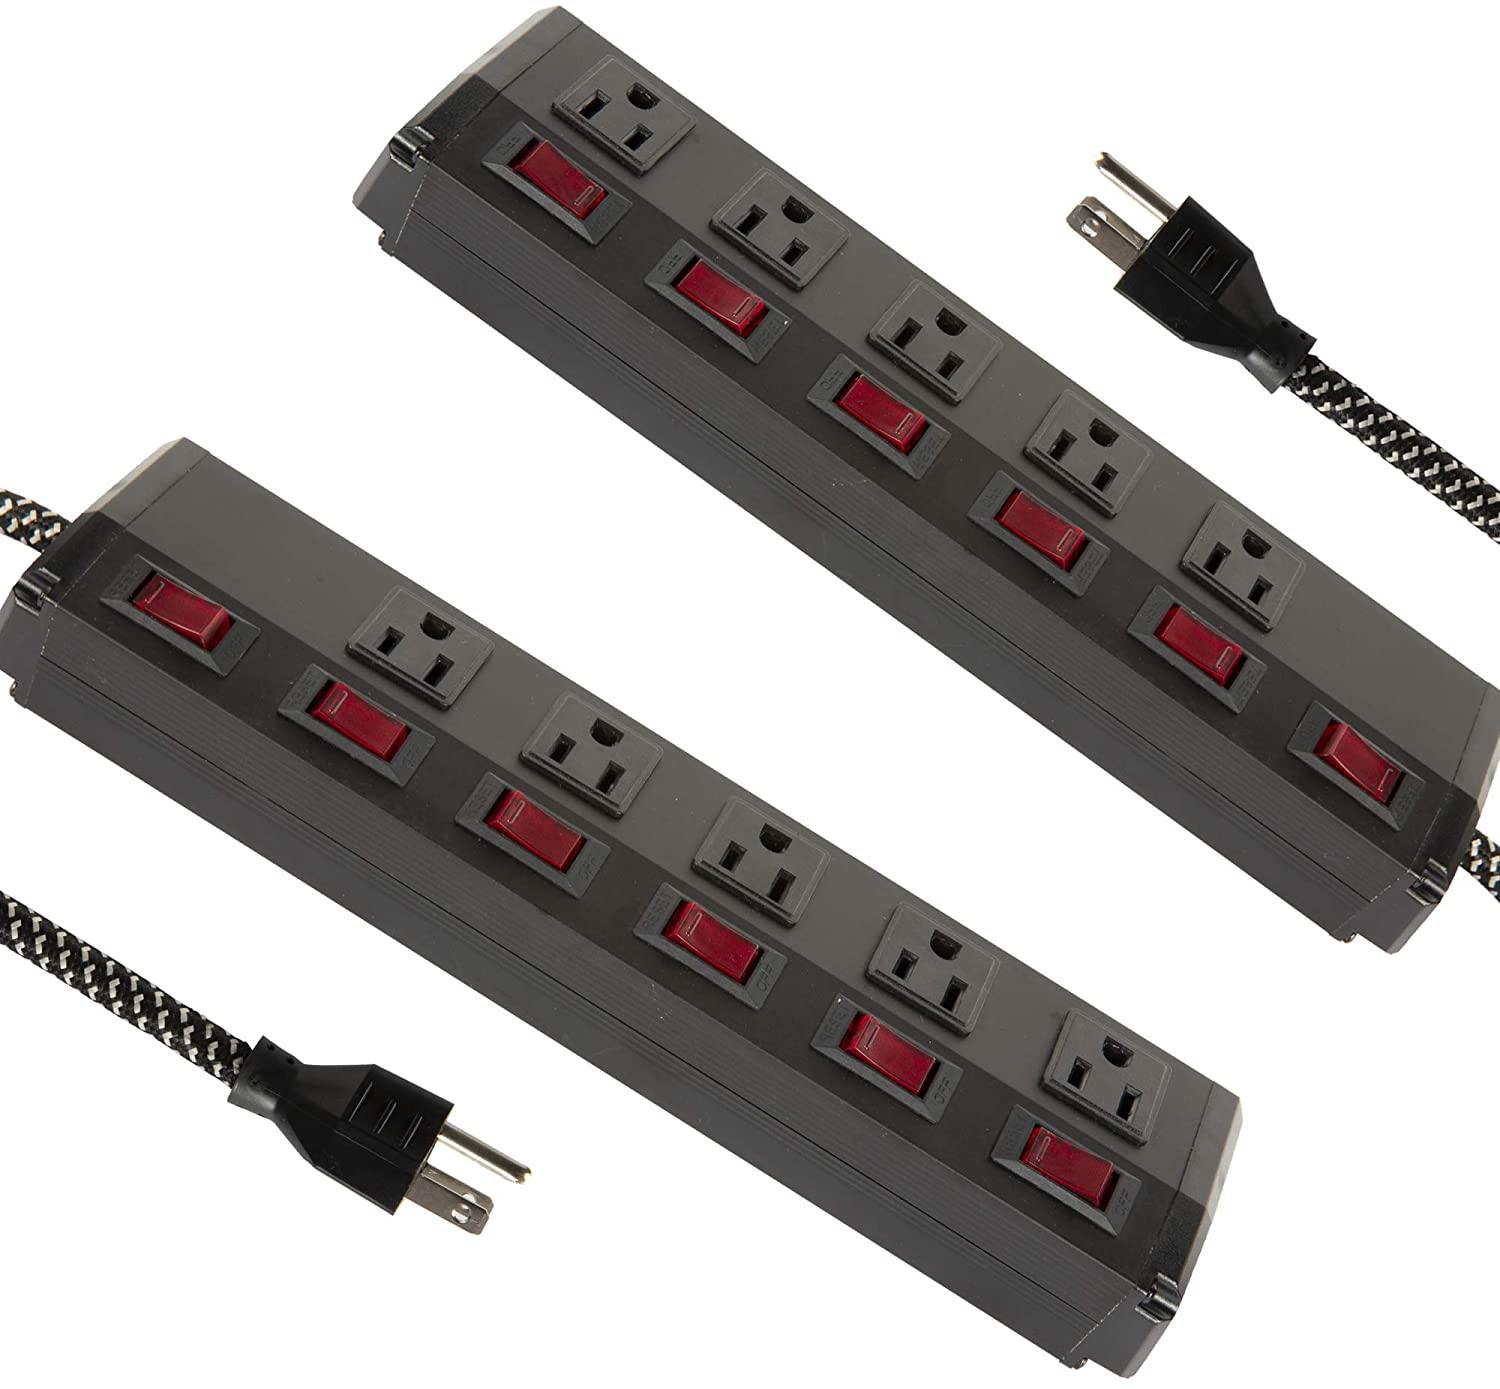 Surge Protector Power Strip with Outlets and USB Charging Ports 6-Foot Cord for Home, Office -Black (2, 5 outlets) - Bosonshop